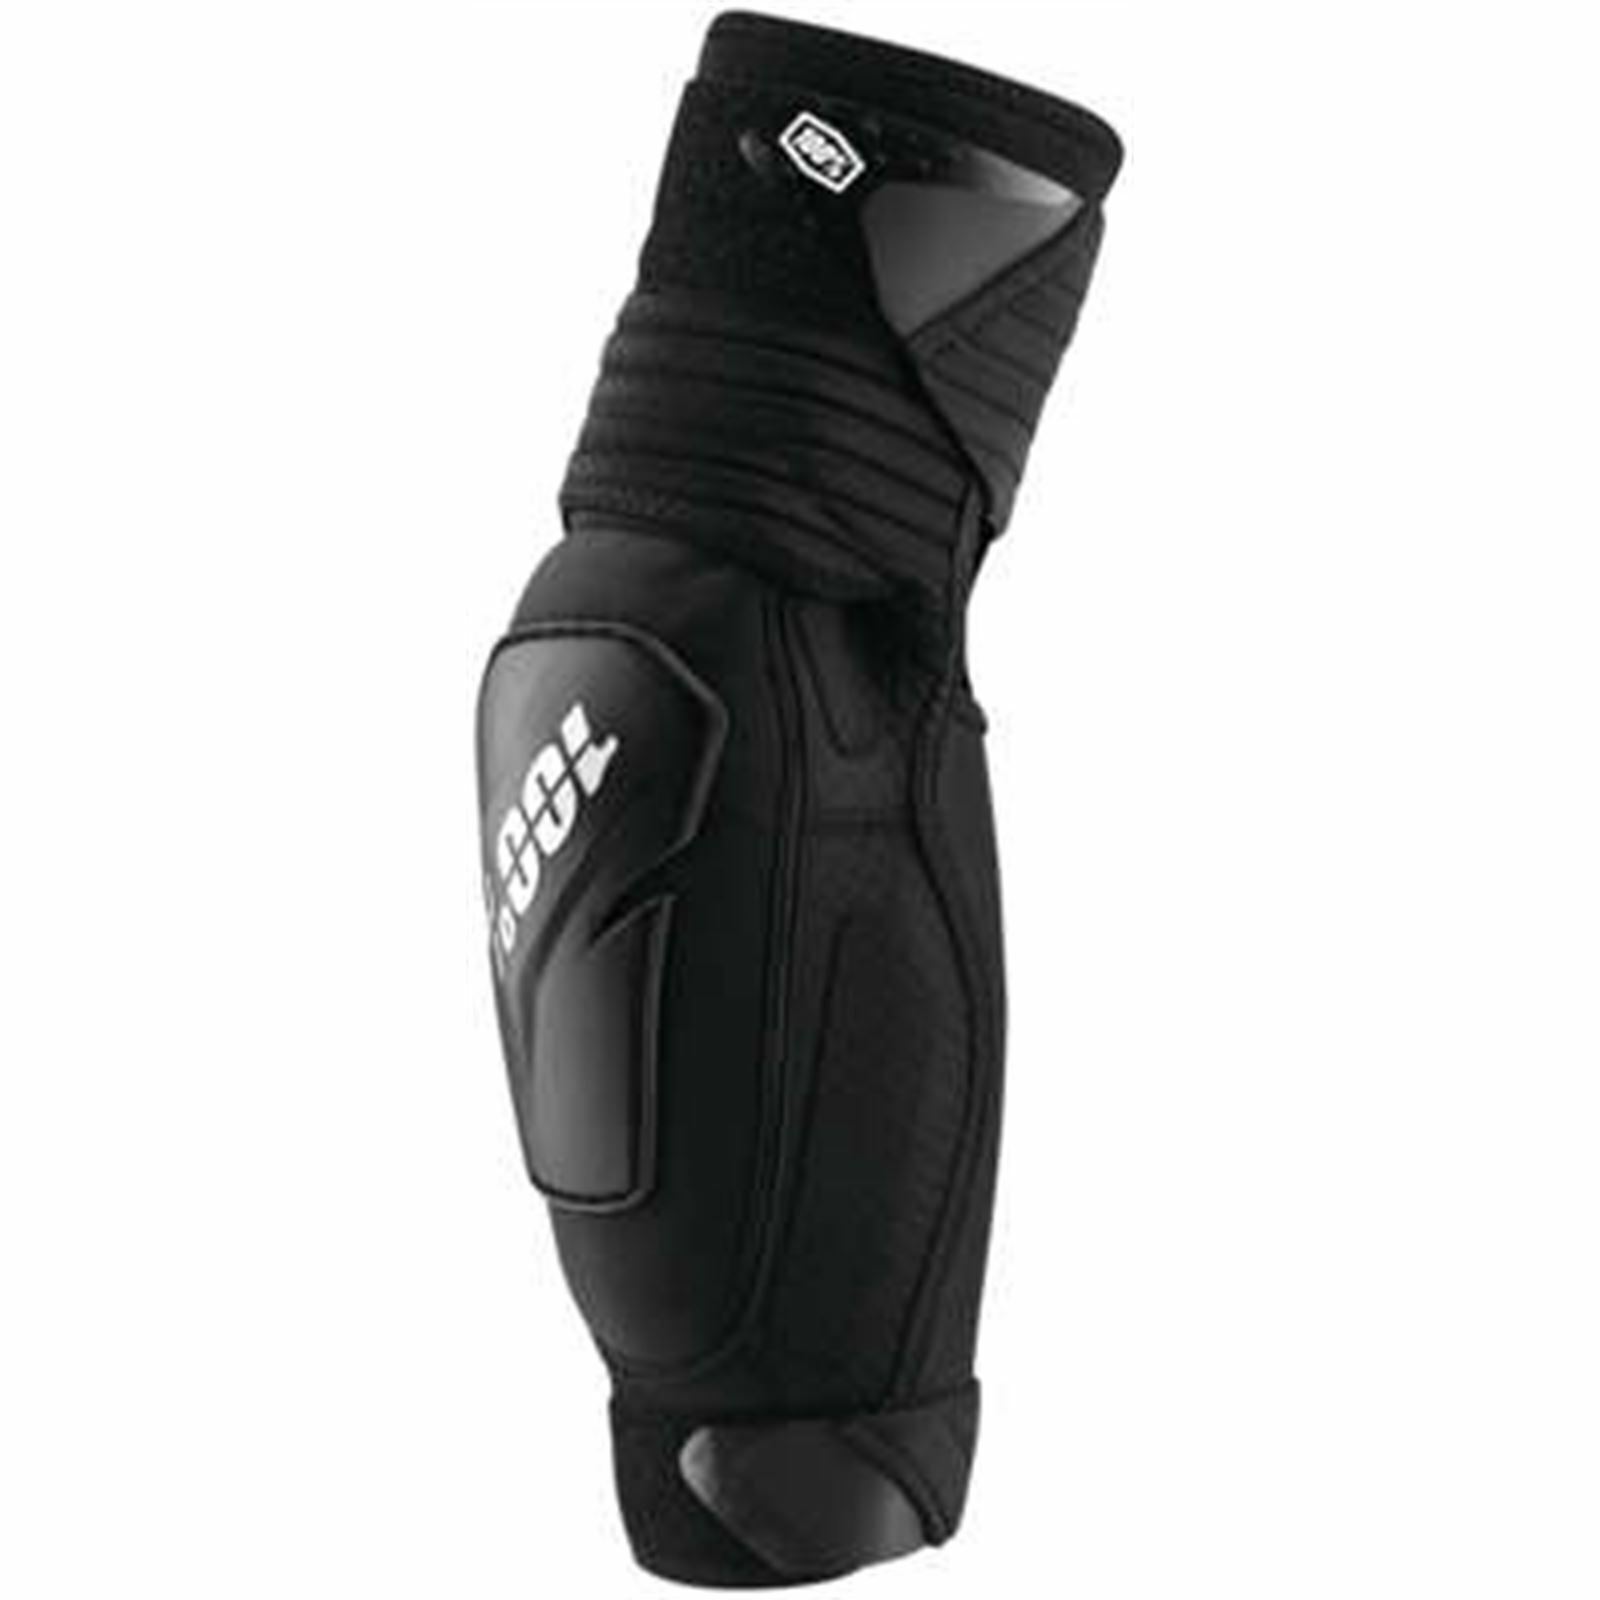 100% Fortis Elbow Guard Blk Sm/Md - Click Image to Close